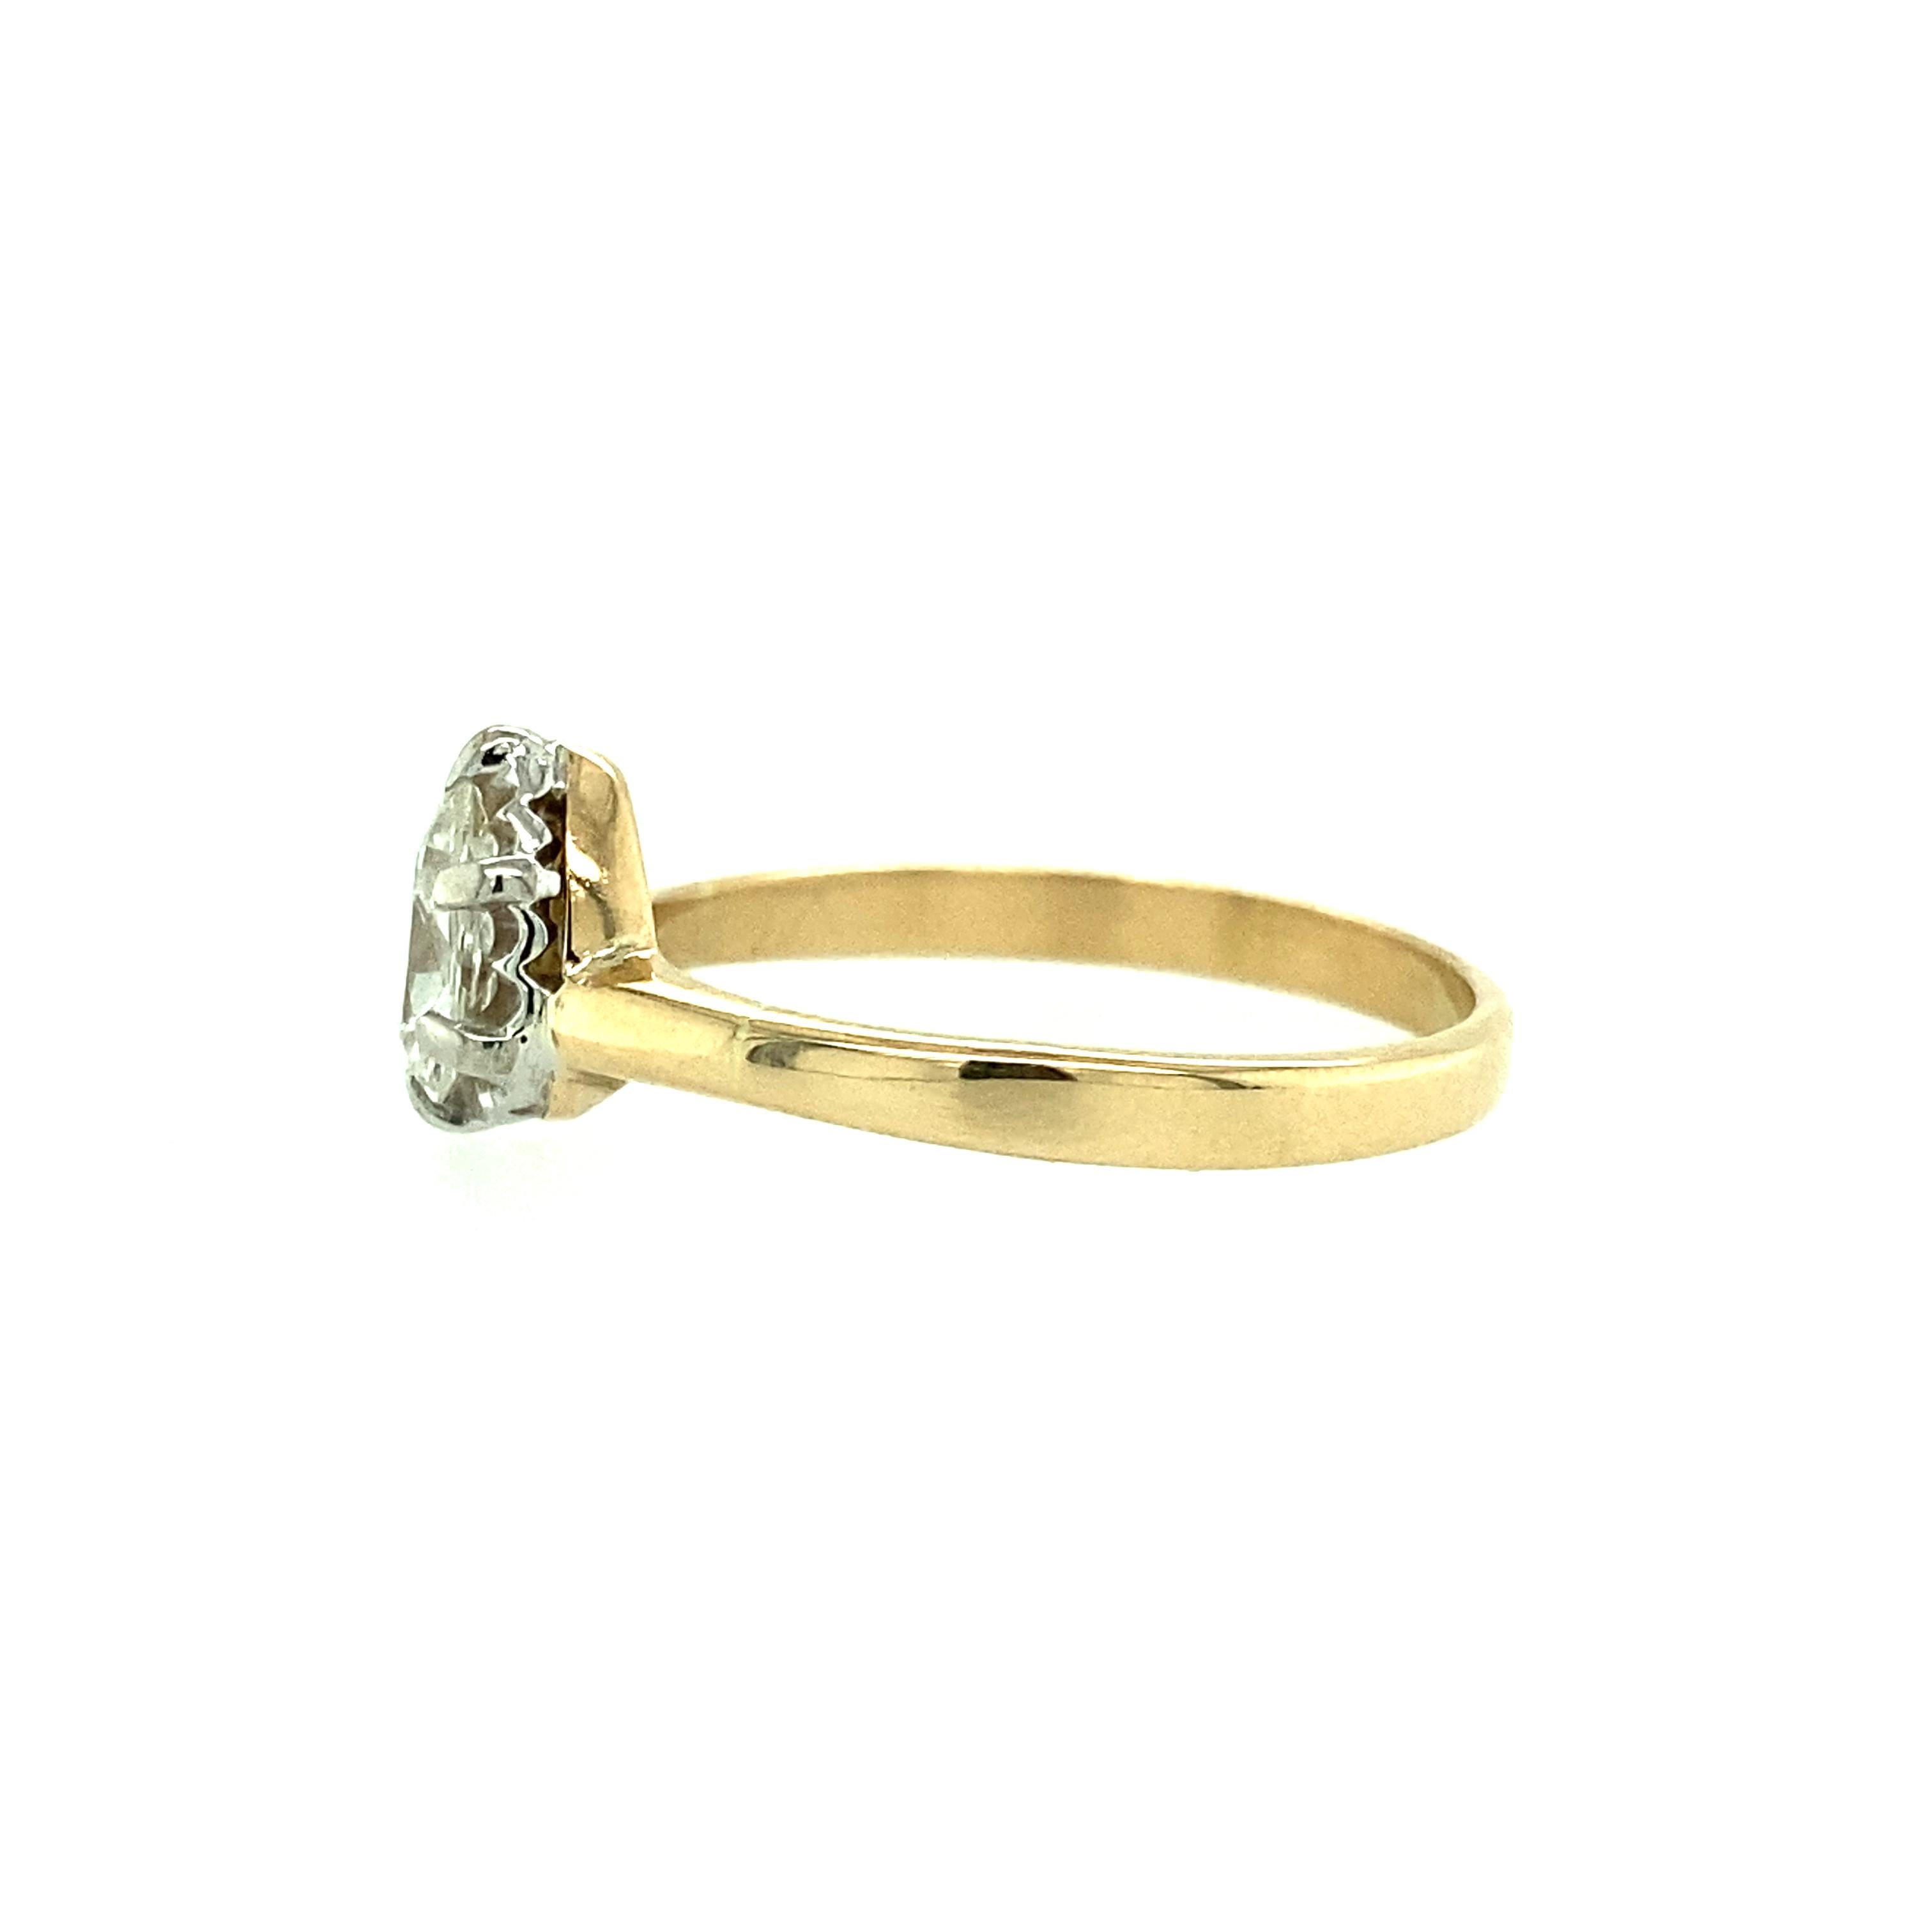 One estate 14 karat yellow and white gold diamond engagement ring set with one antique pear shaped diamond, 0.65 carat total with K color and I2 clarity.  The diamond is set in a 14 karat white gold six prong setting. There is a small chip on the